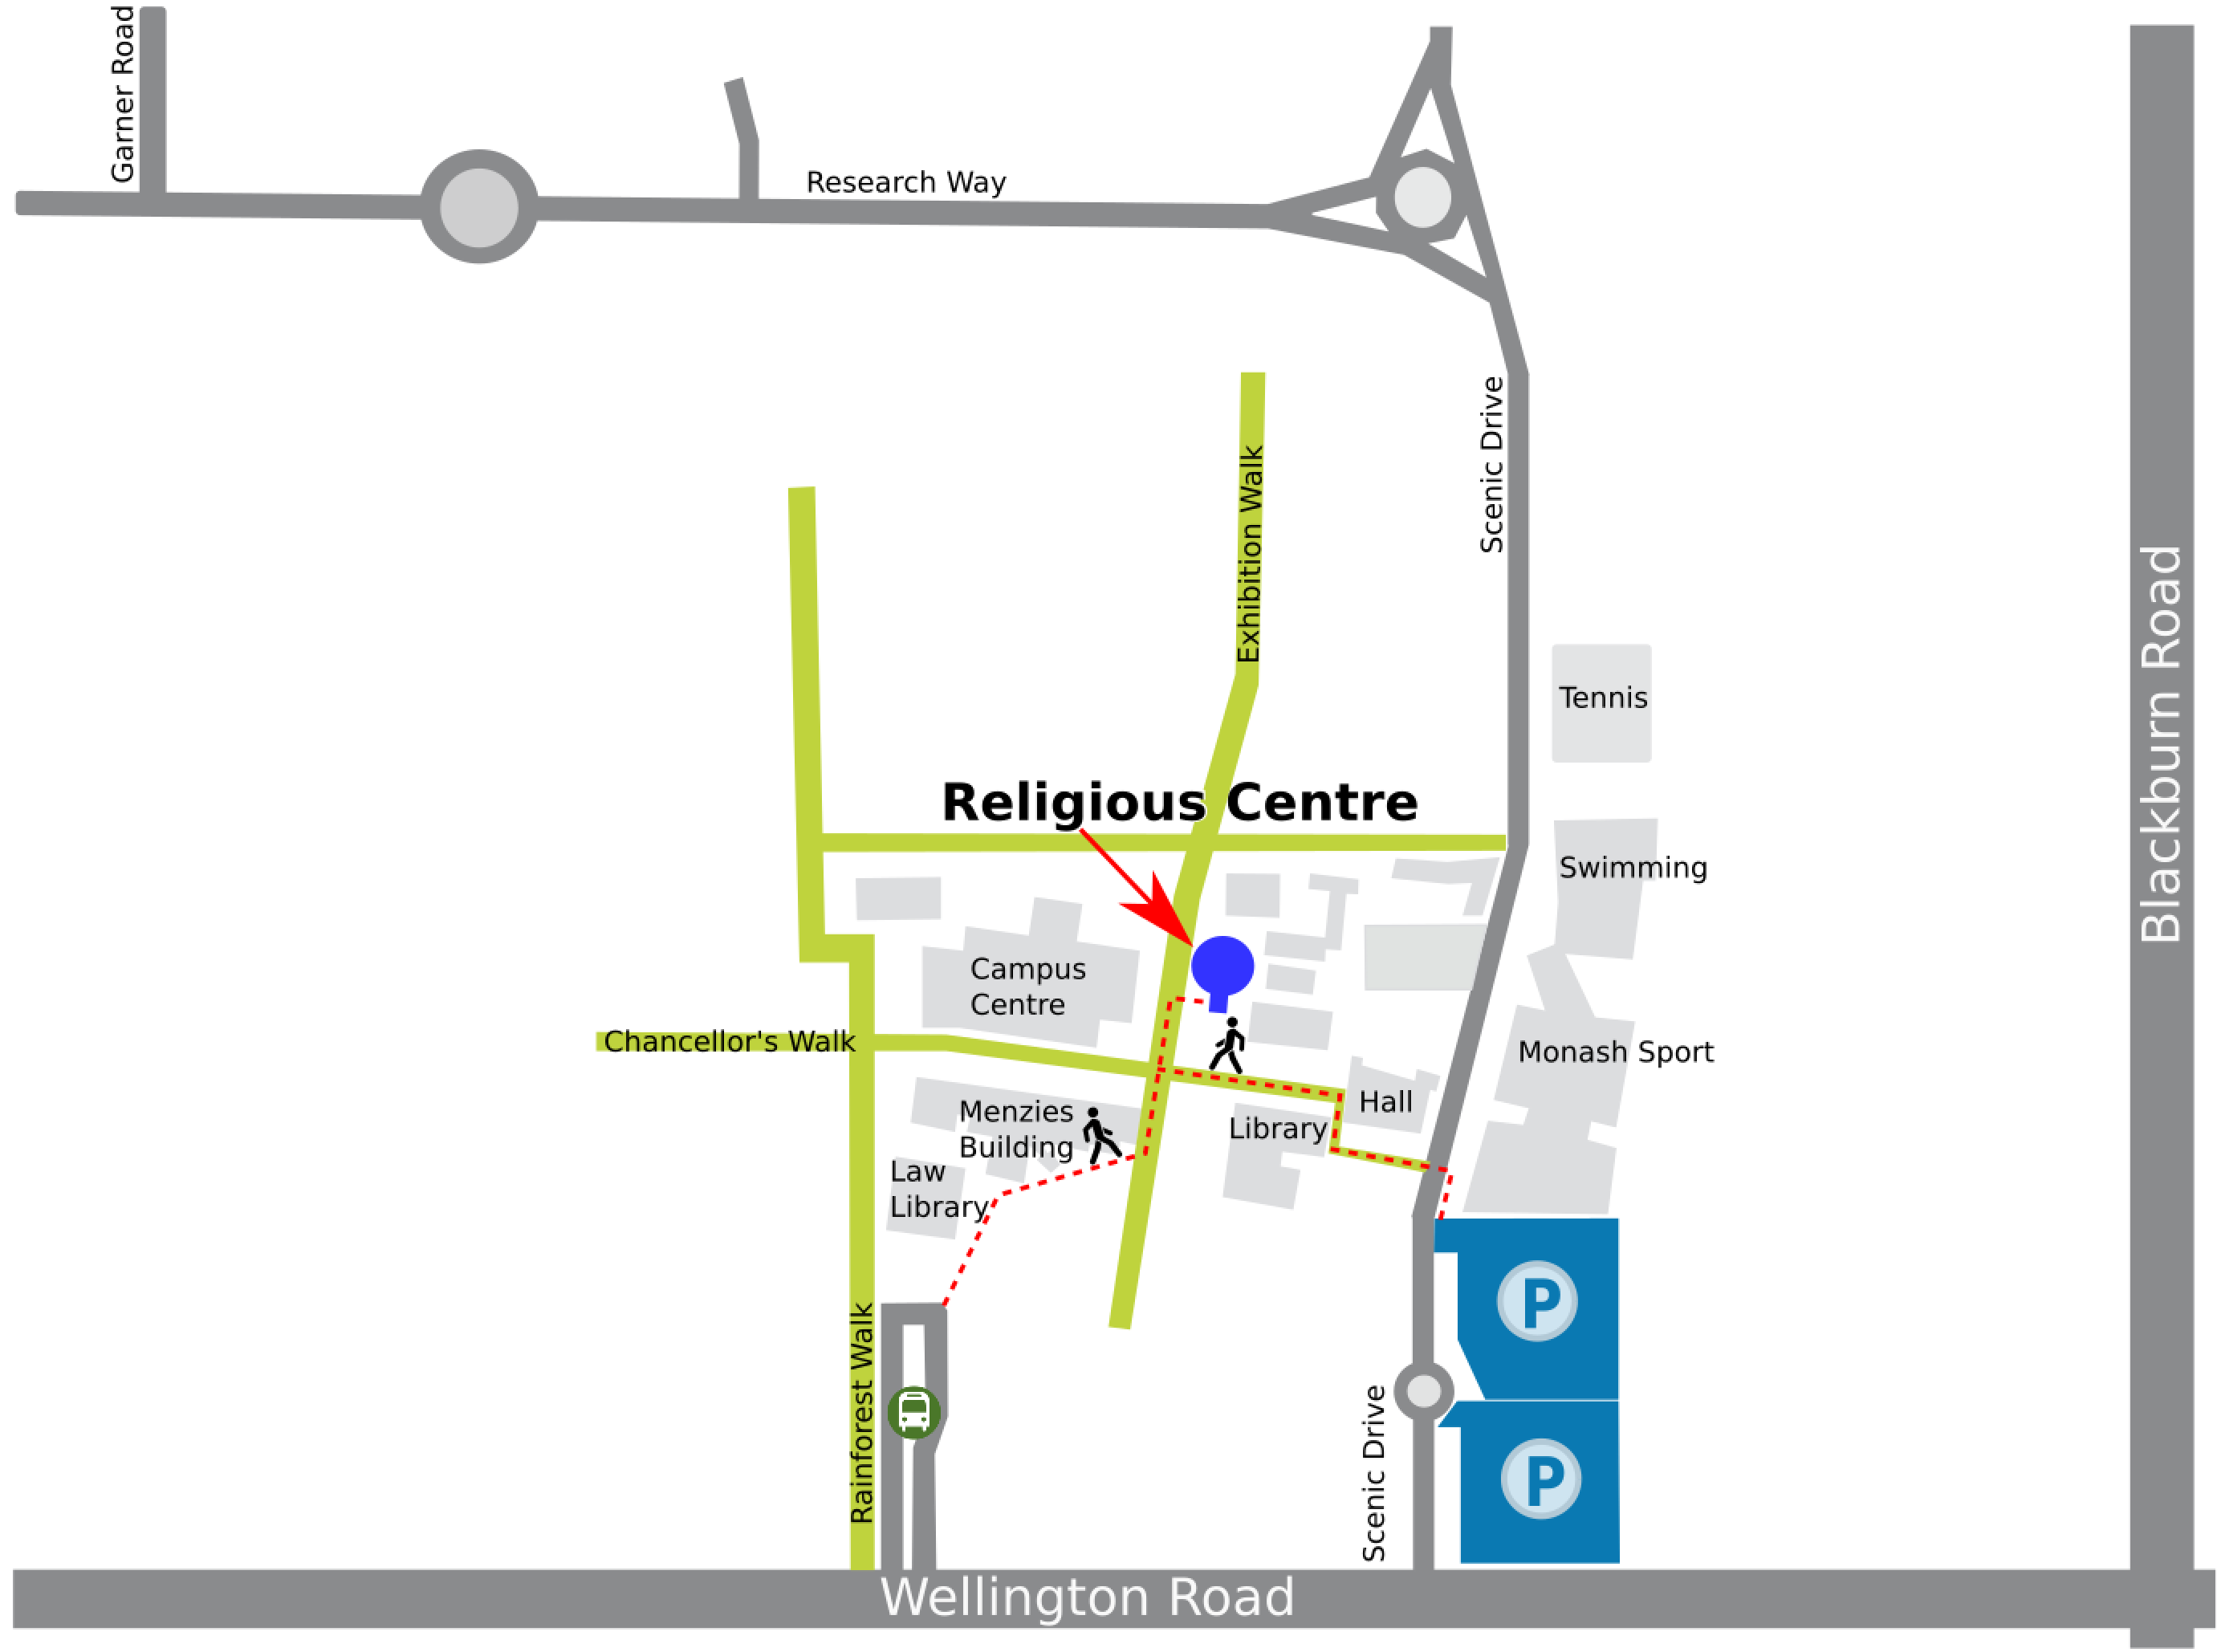 Map showing directions to the Clayton Campus Religious Centre